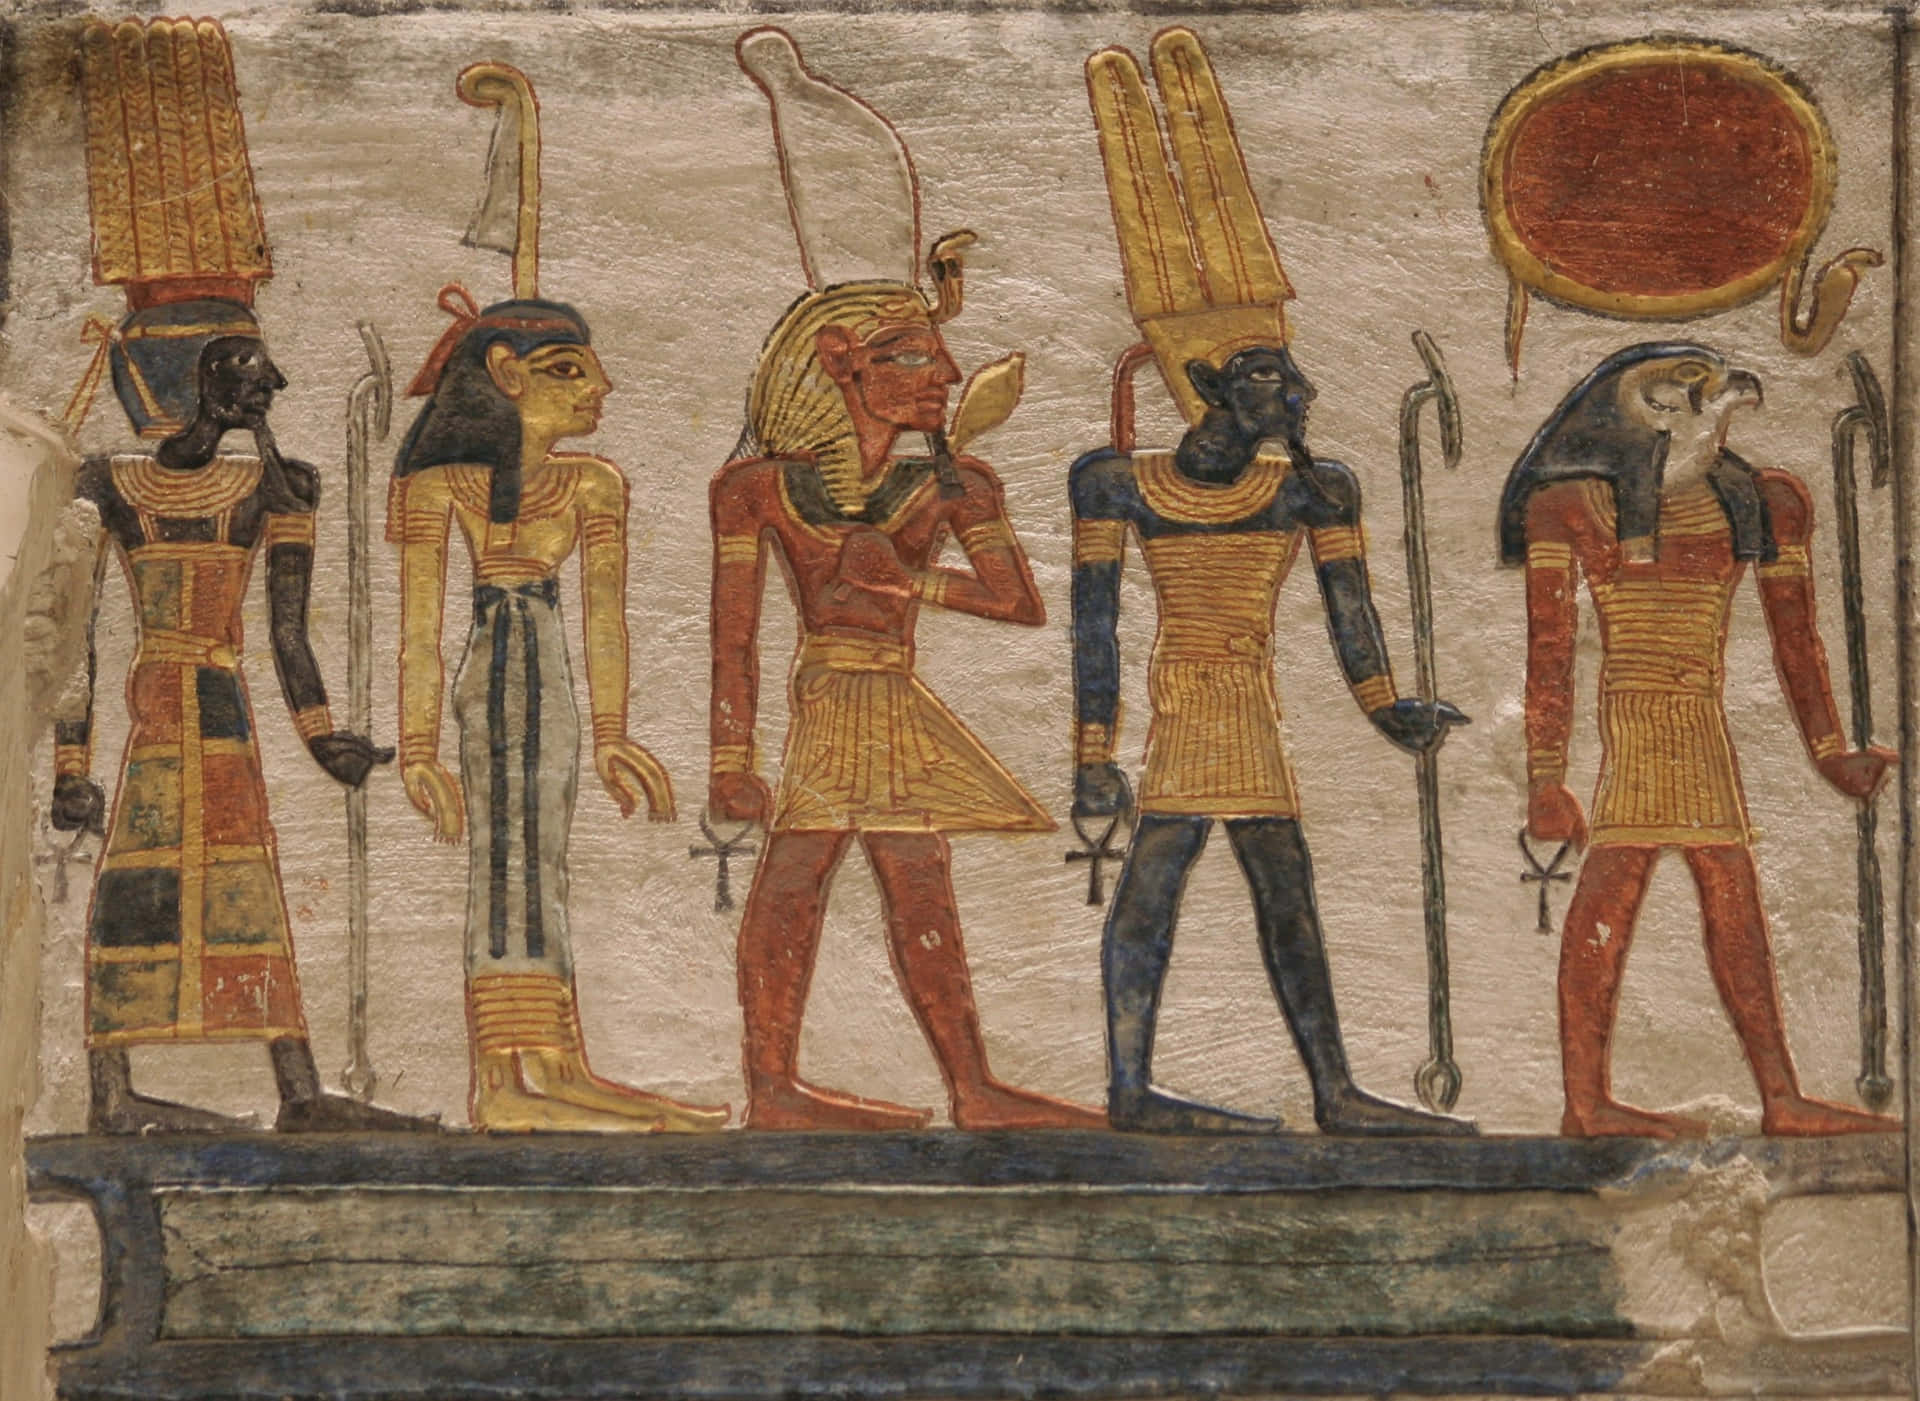 The majestic depiction of Egyptian Gods in their divine forms